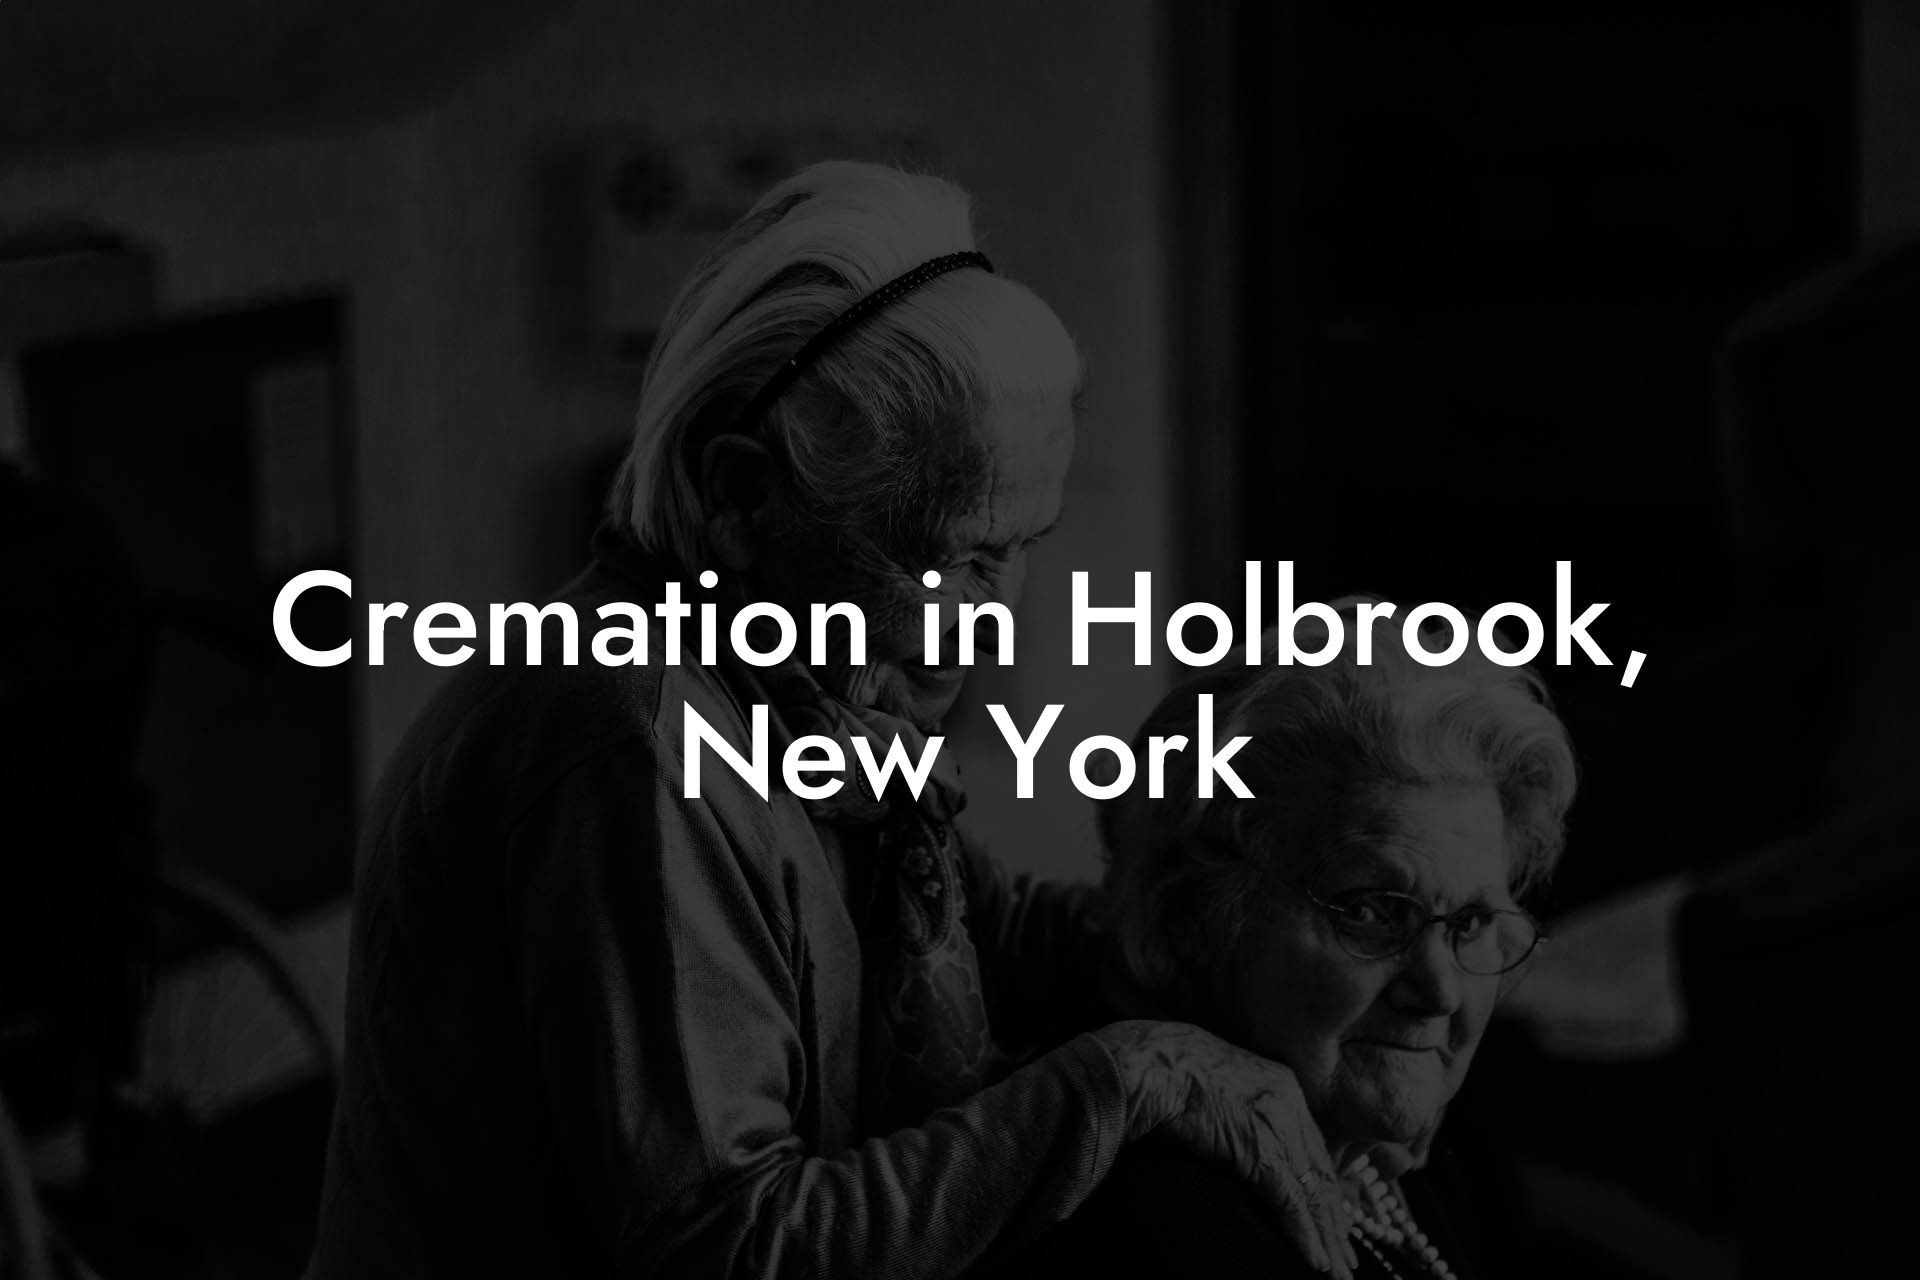 Cremation in Holbrook, New York